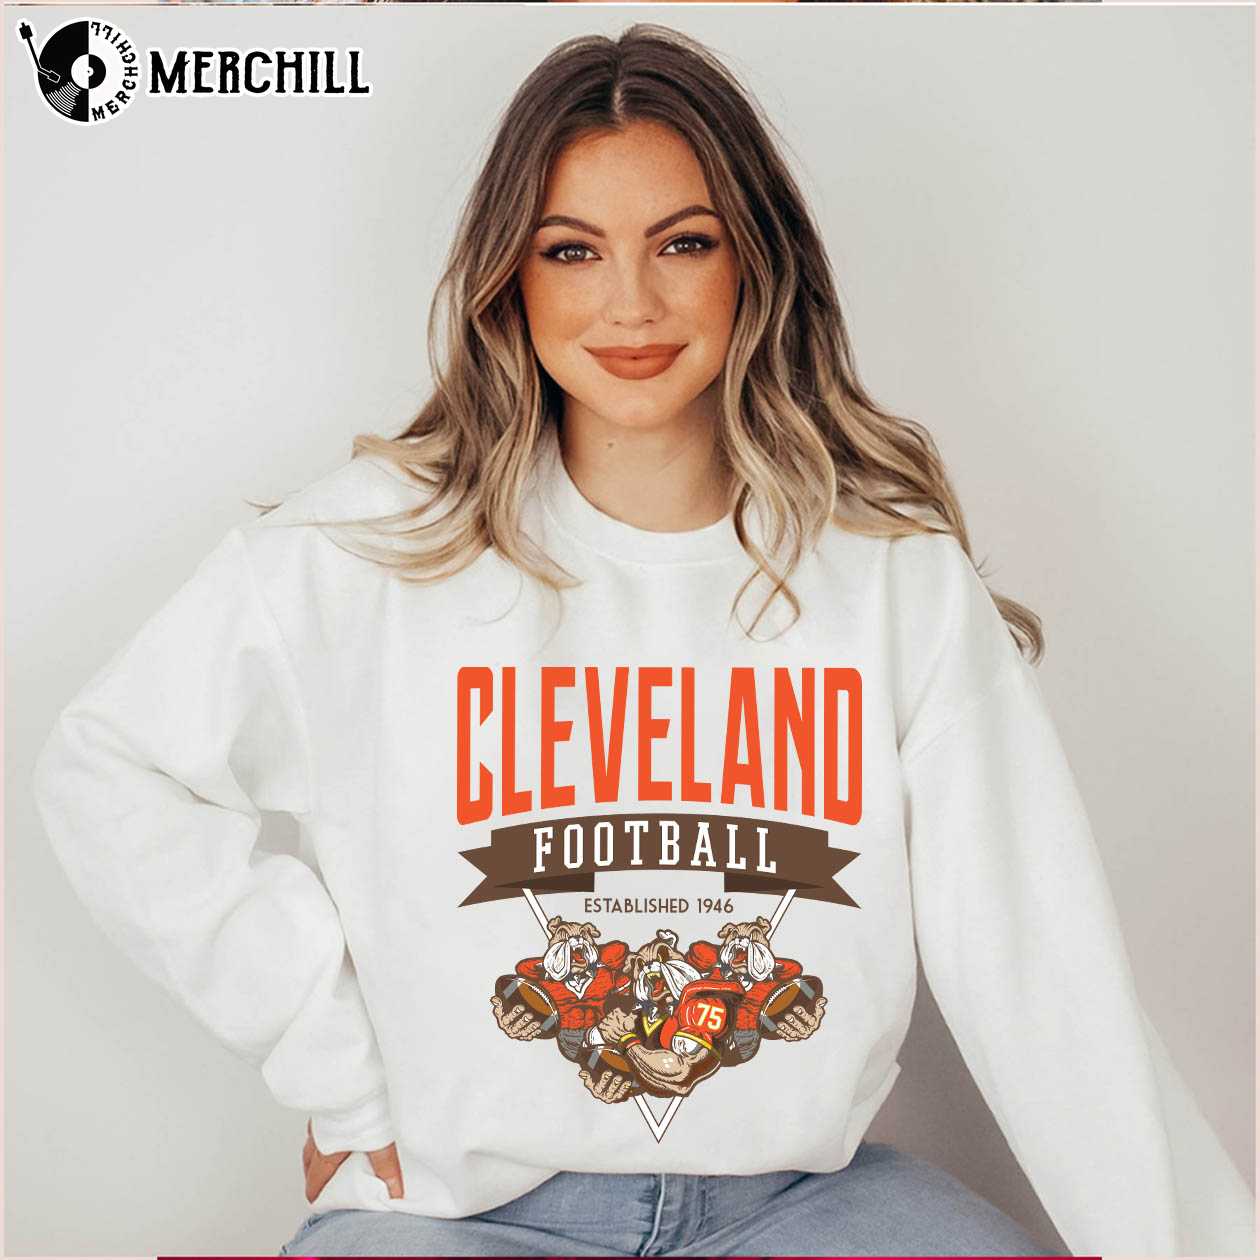 Cleveland Browns Ladies Apparel, Ladies Browns Jerseys, Clothing